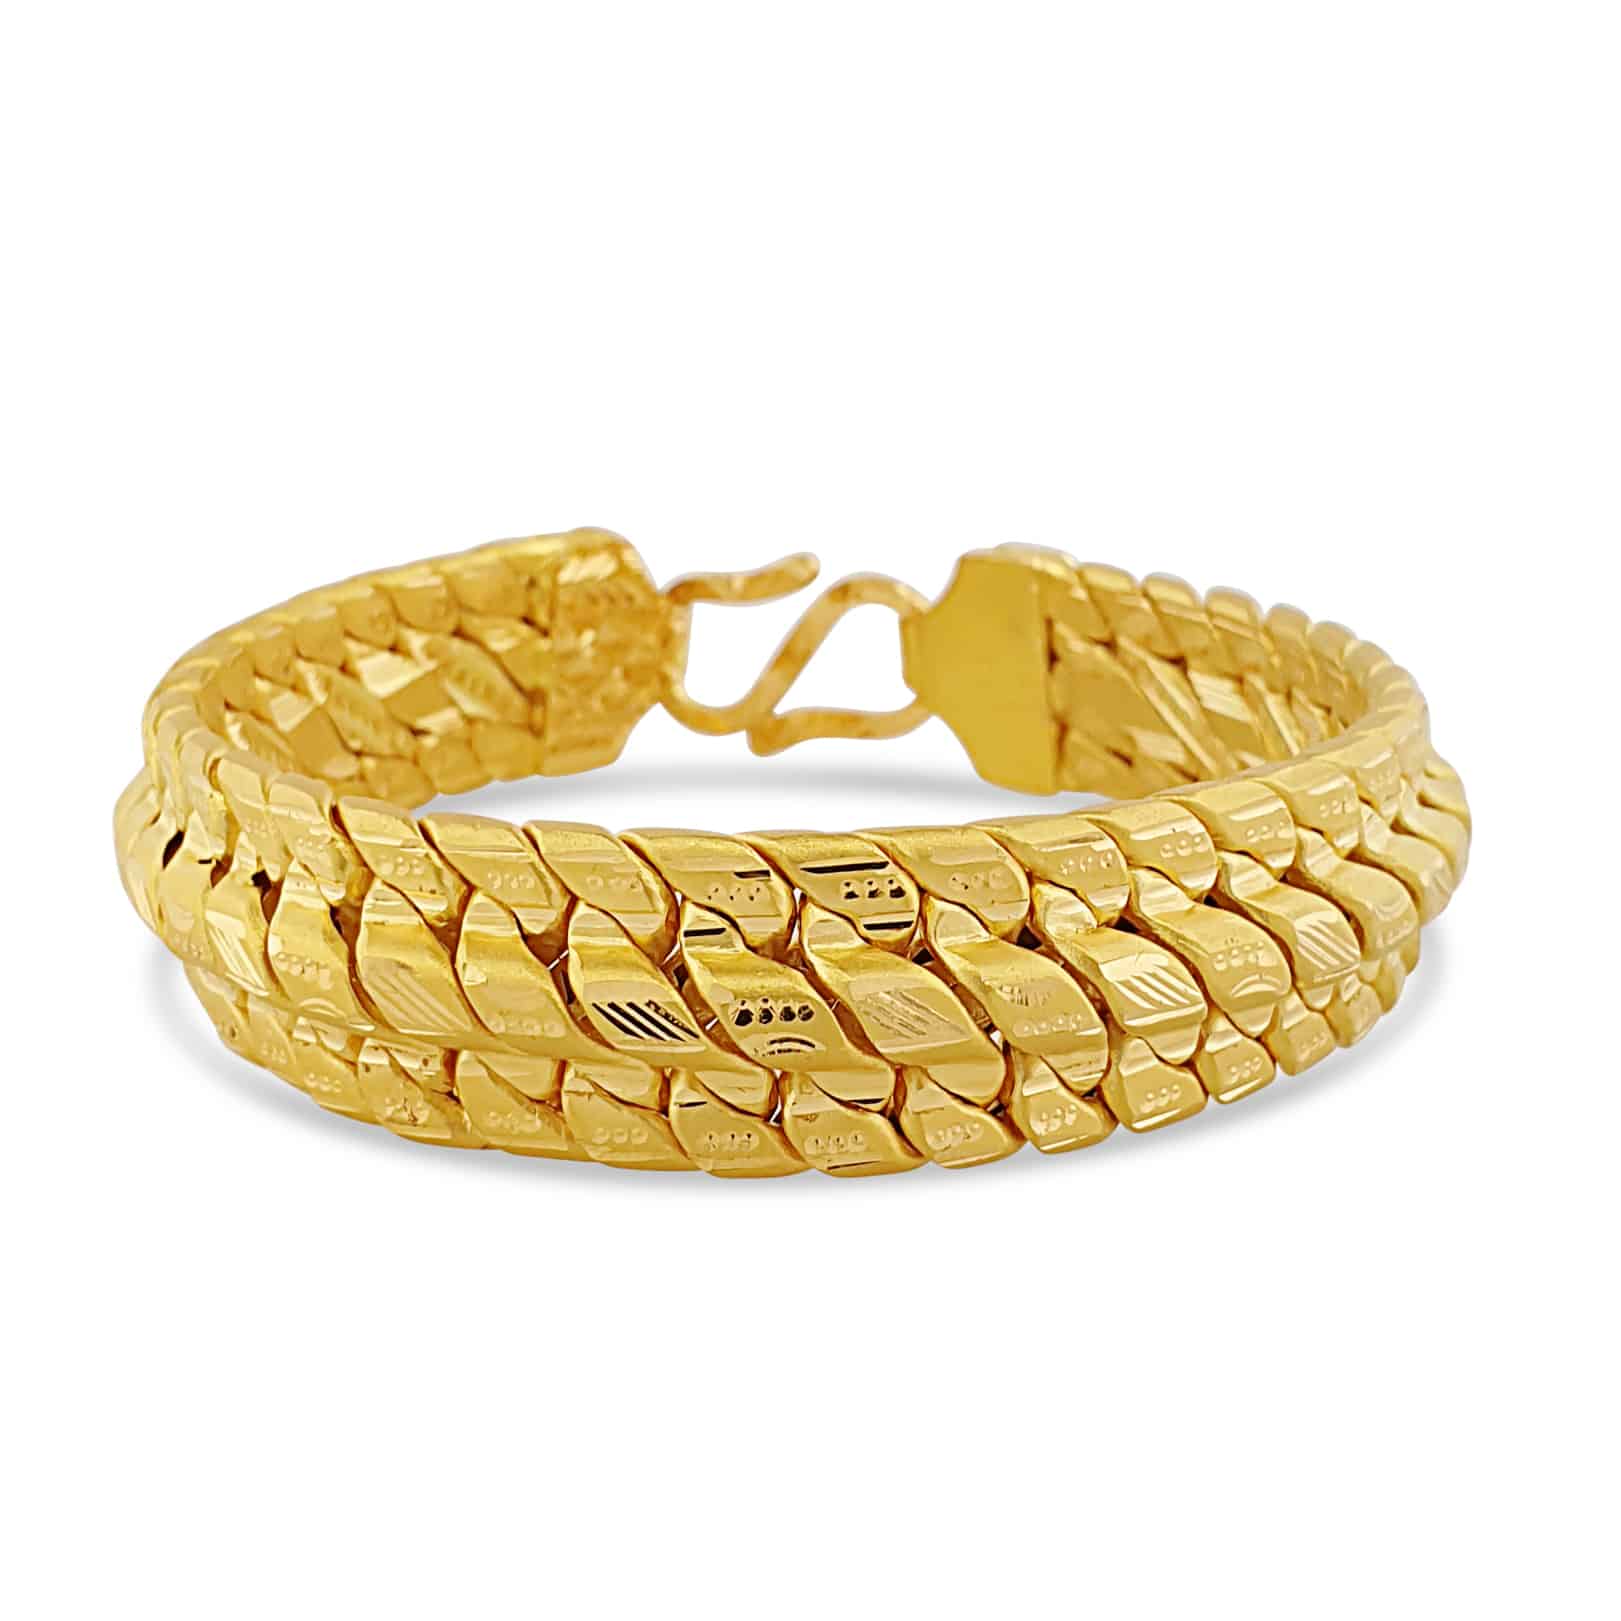 Buy Tanishq 22k Gold Bracelet from top Brands at Best Prices Online in  India | Tata CLiQ